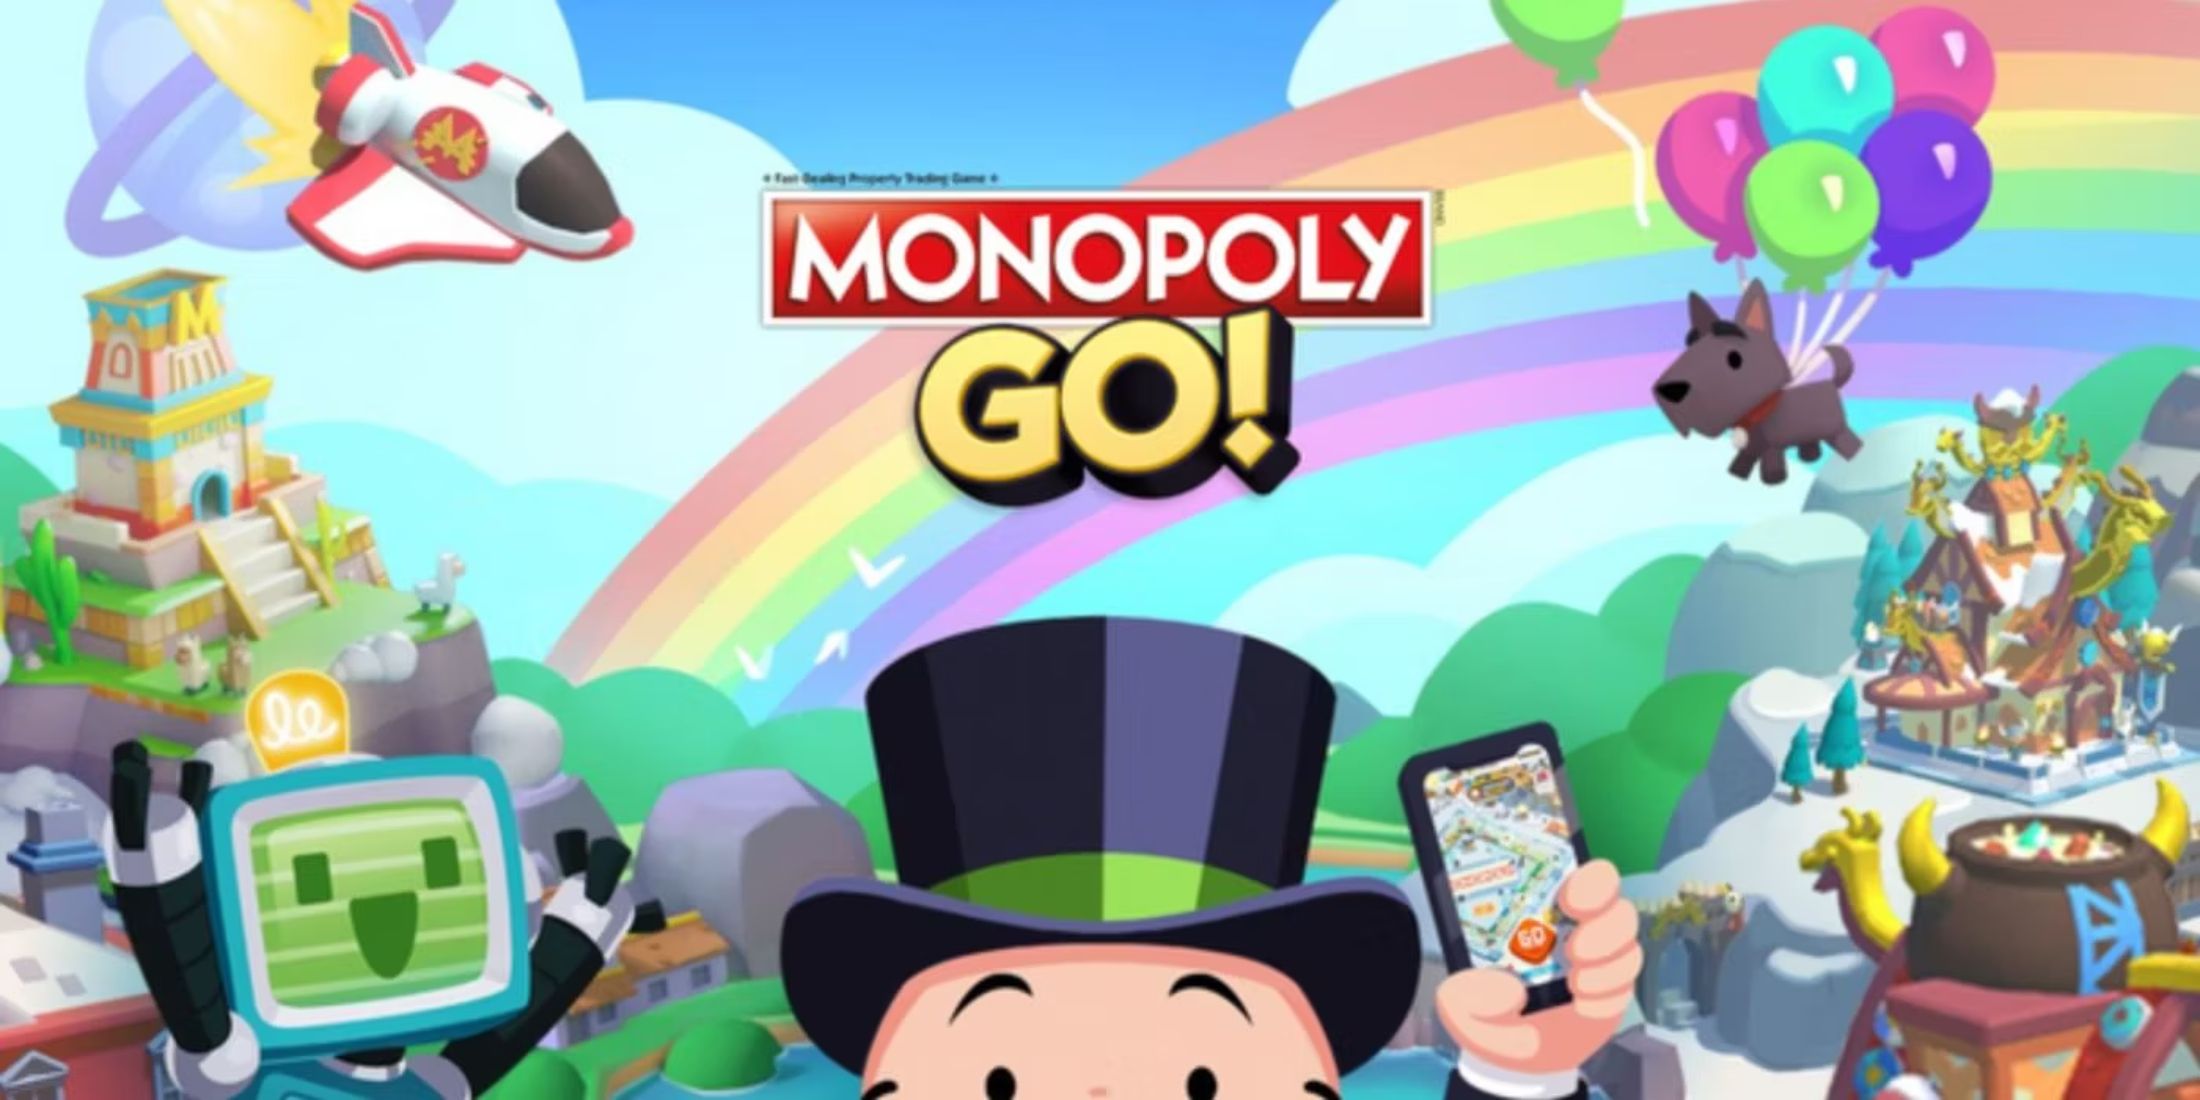 The cover art of Monopoly GO (1)